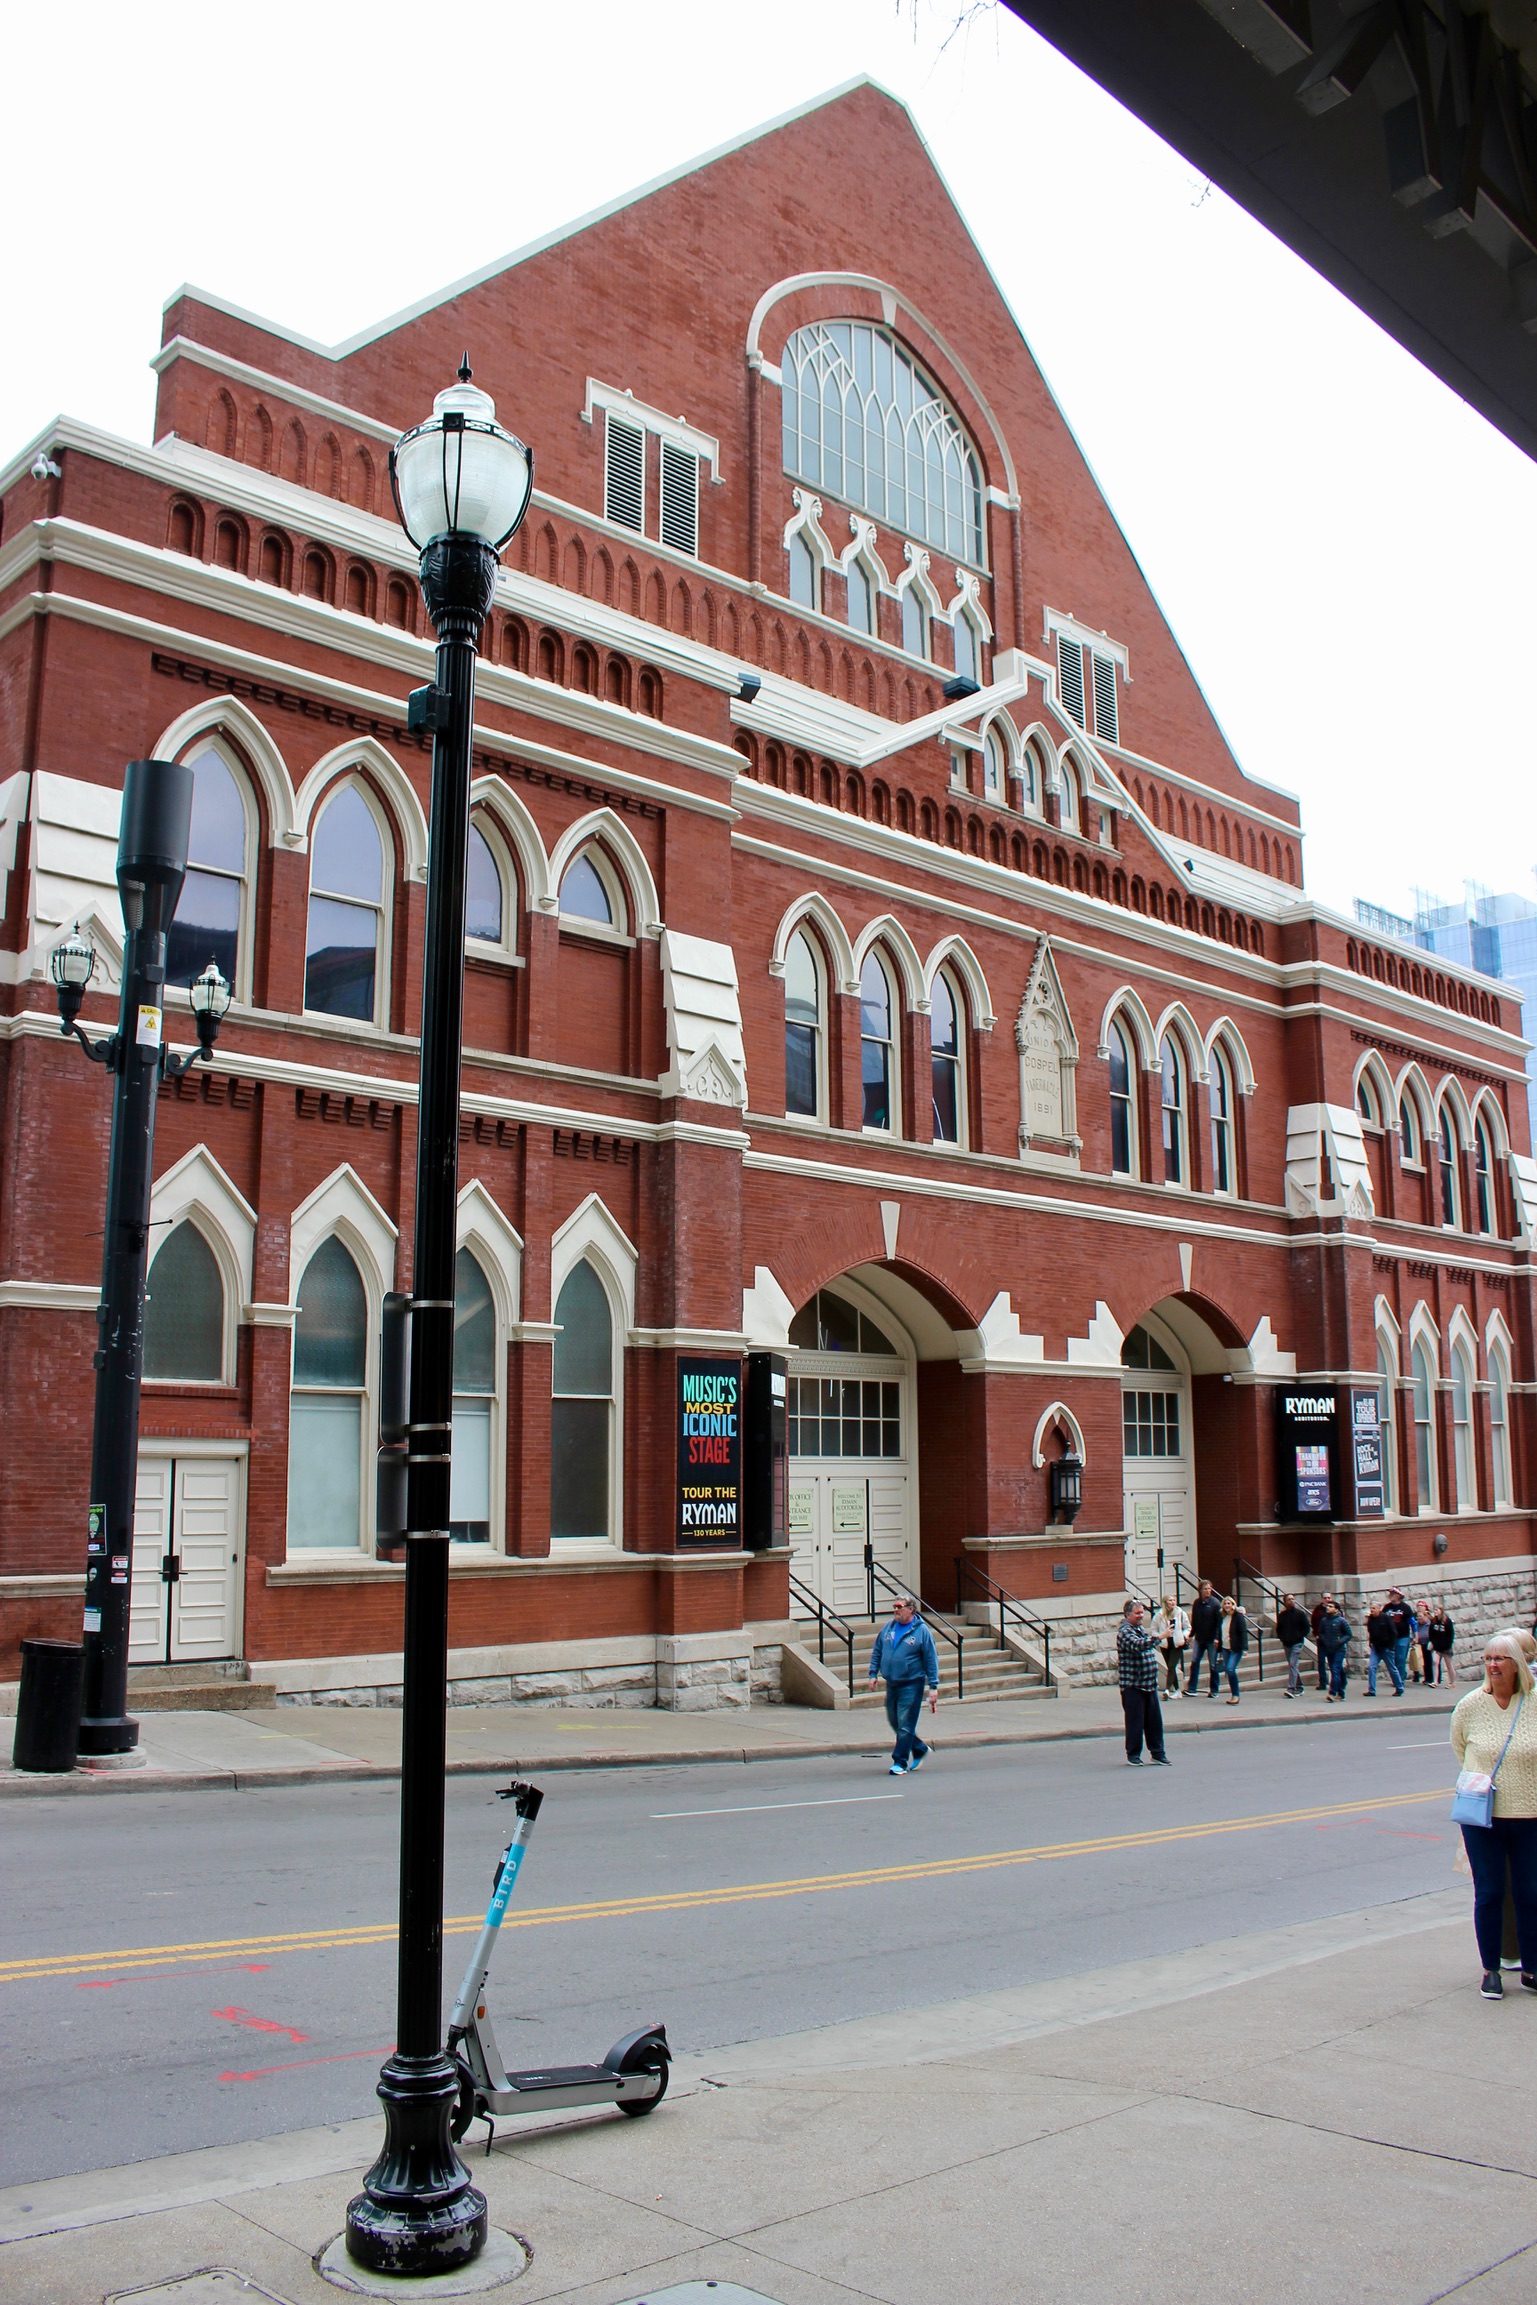 Ryman Auditorium | "Mother Church of Country Music"